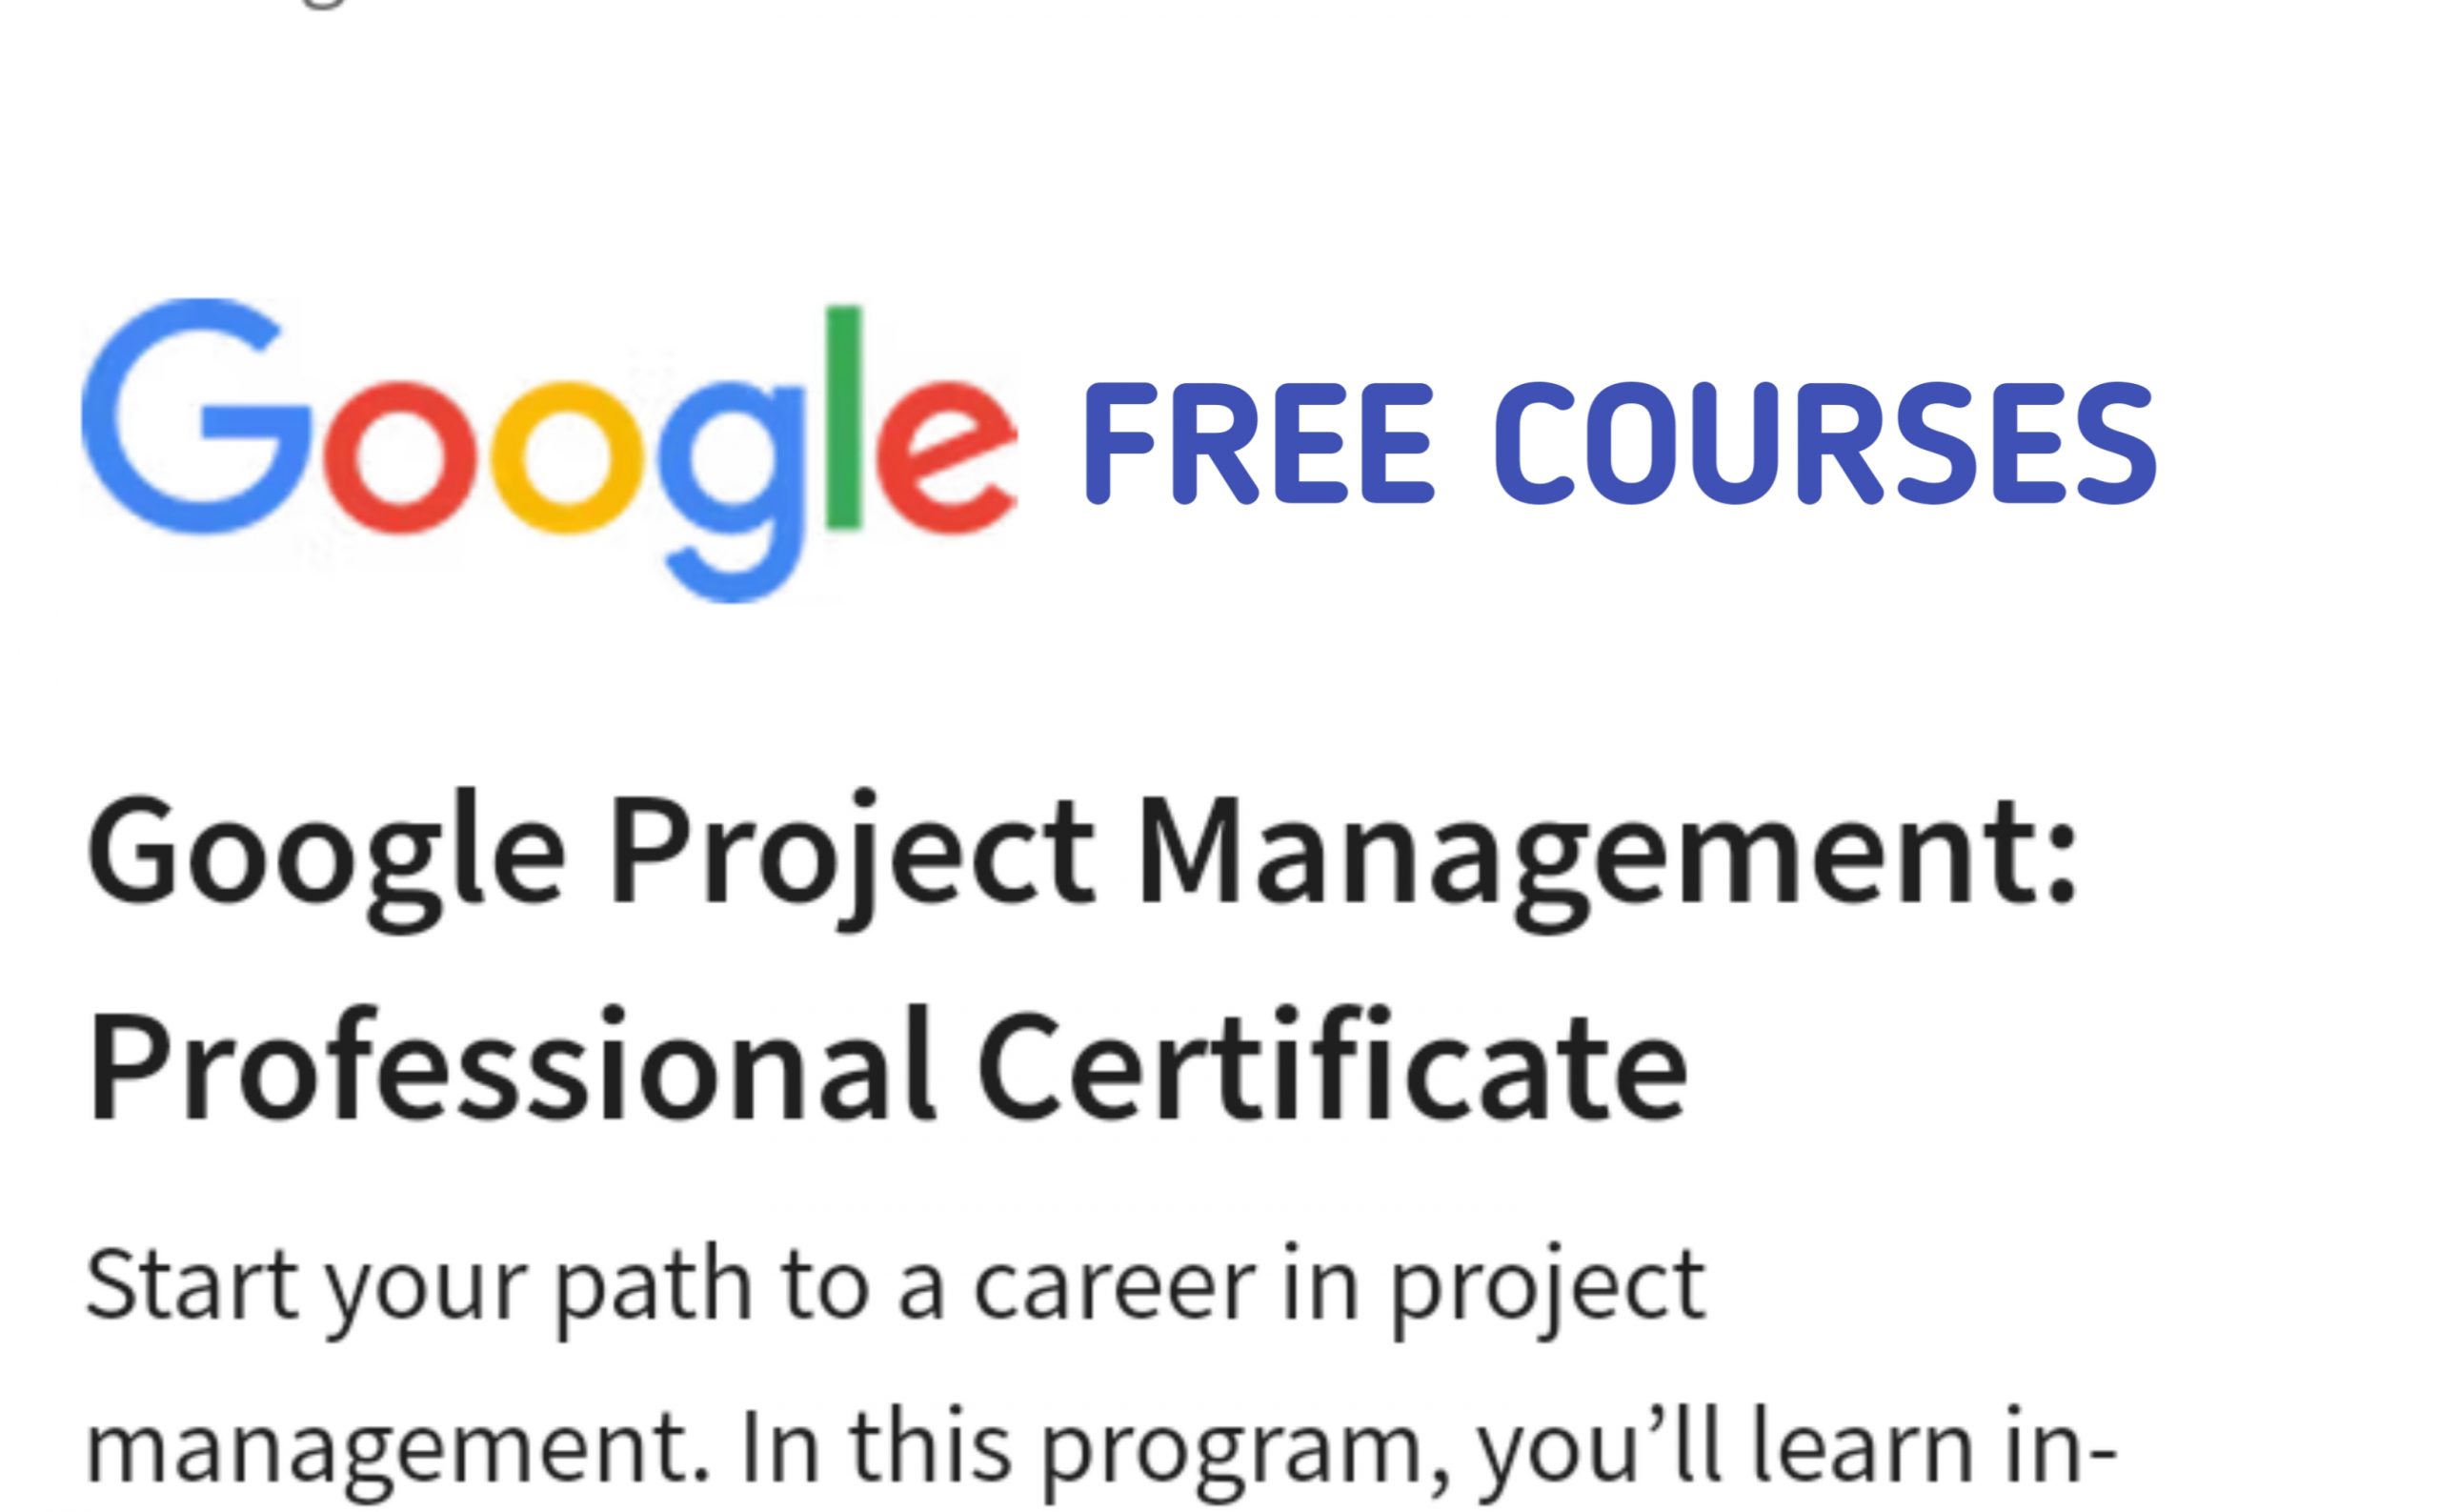 20220926 162020 scaled - Google Free Management Courses and Professional Certificate (100% Free and Online)